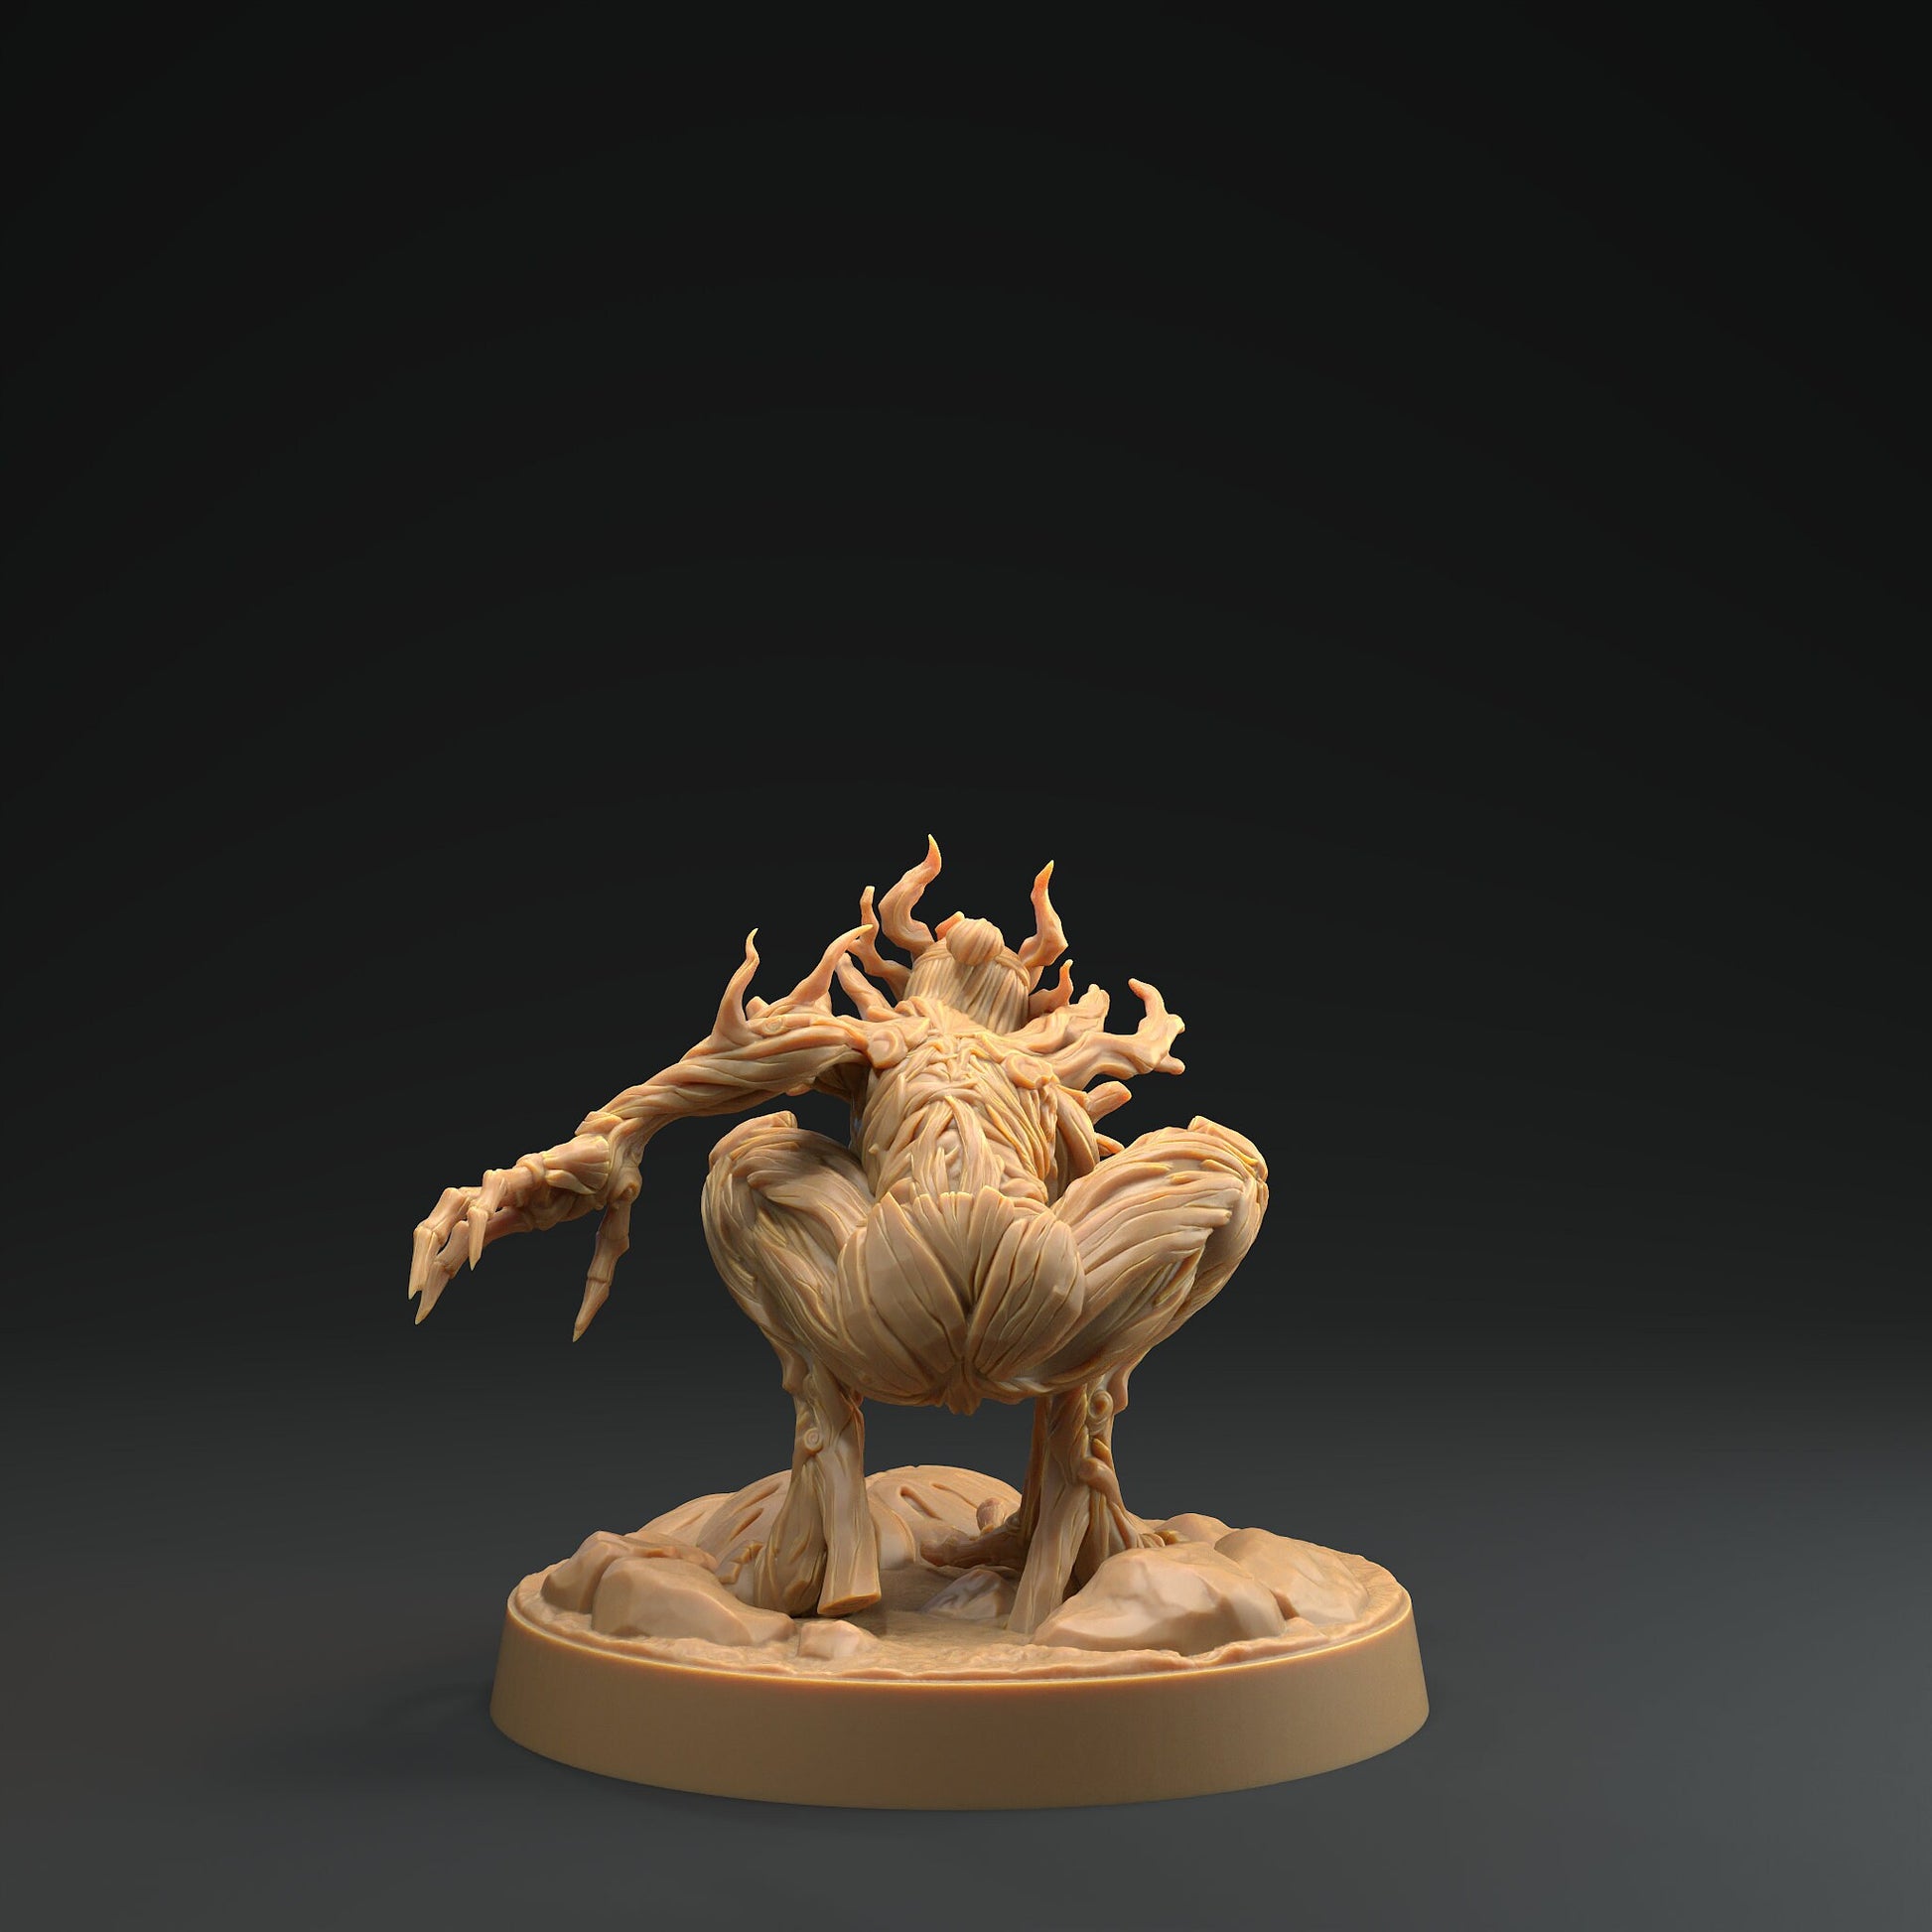 Dryads | RPG Miniature for Dungeons and Dragons|Pathfinder|Tabletop Wargaming | Fey Miniature | Dragon Trappers Lodge